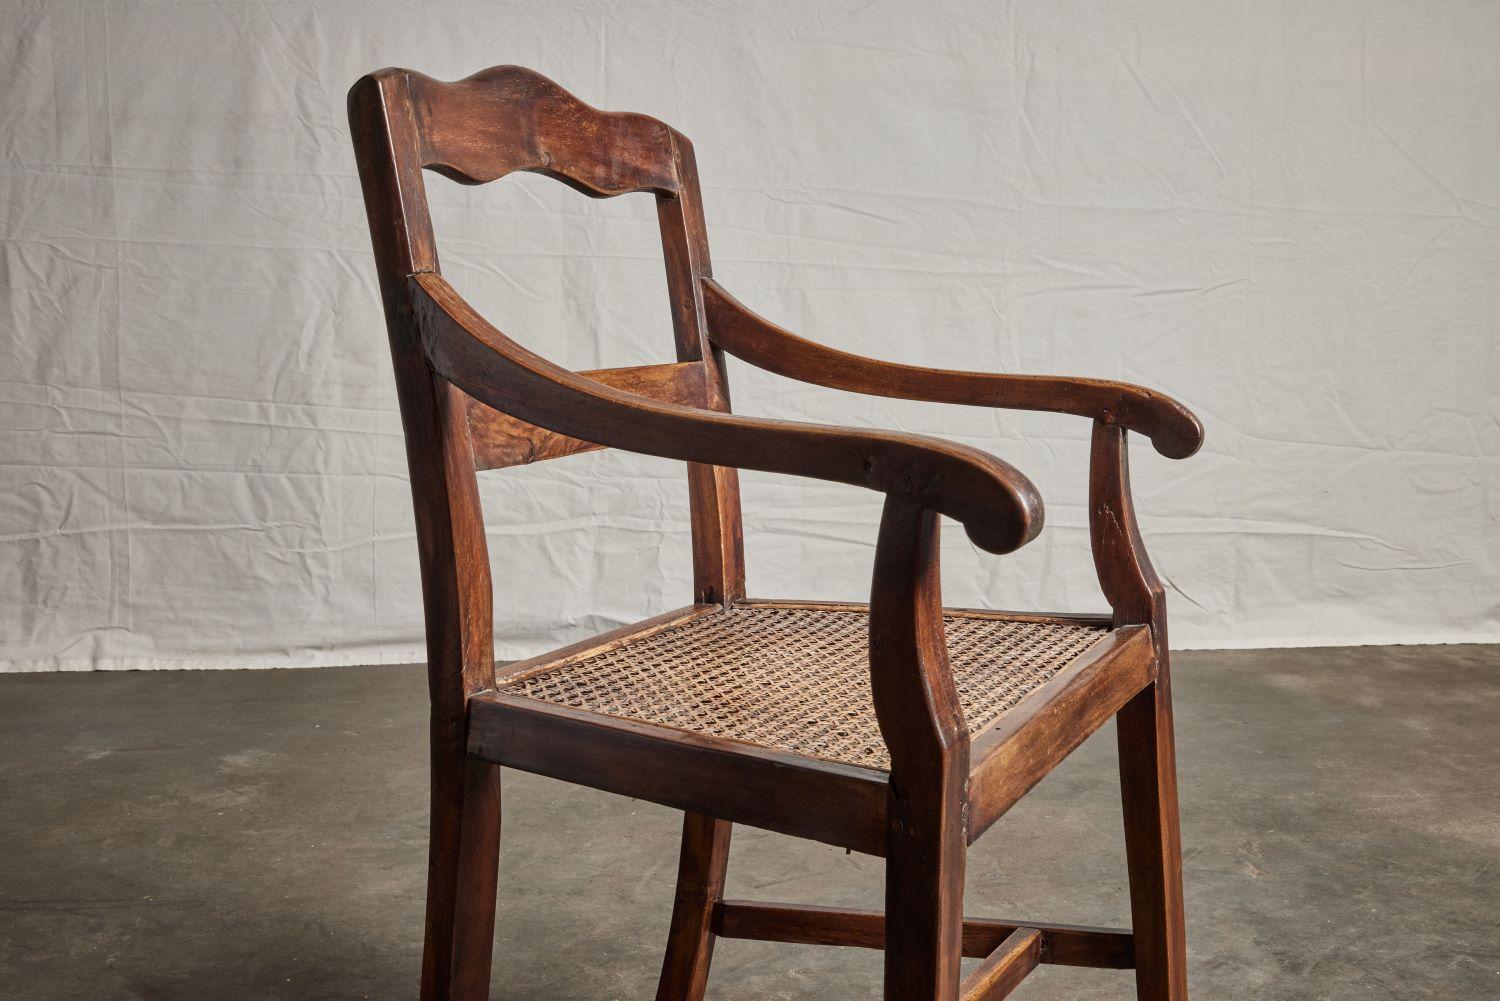 19th Century Philippine Nara Wood Arm Chair with Cane Seat